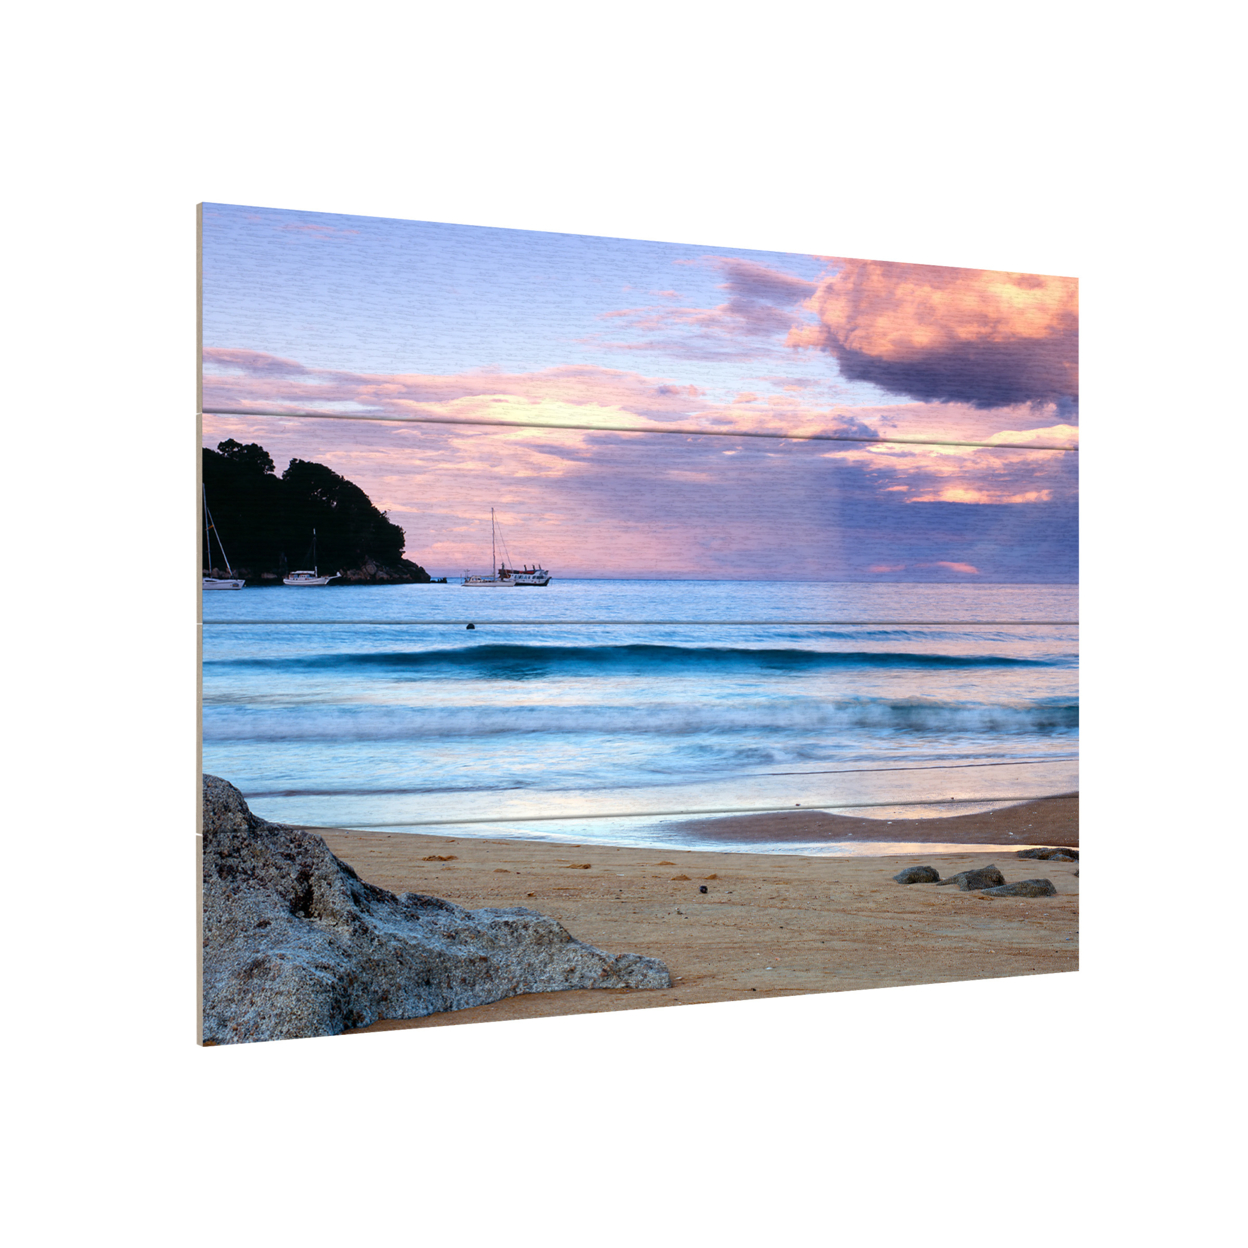 Wall Art 12 X 16 Inches Titled Kaiteriteri Sunset Ready To Hang Printed On Wooden Planks